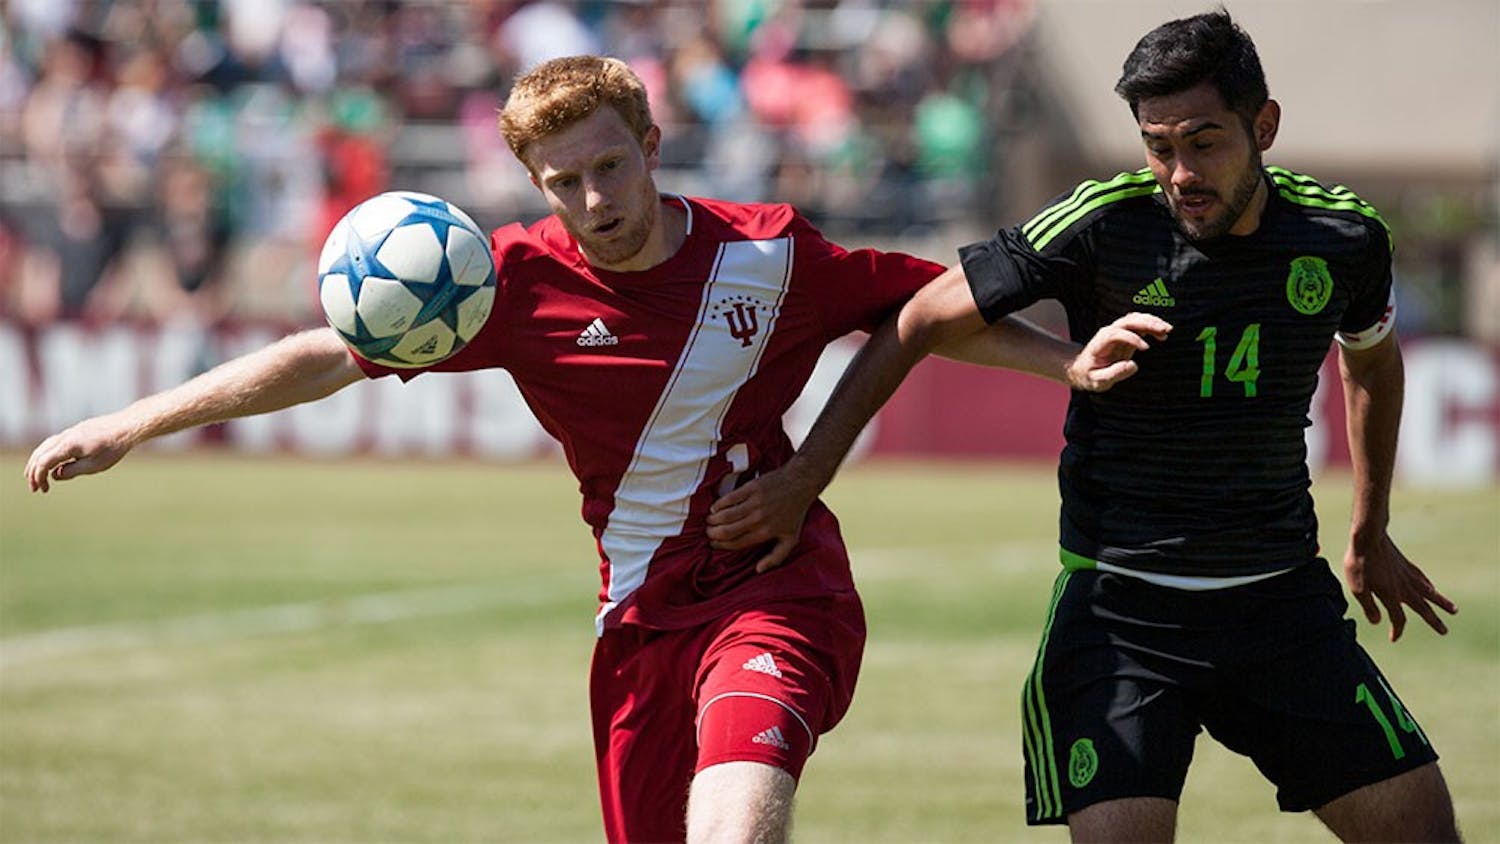 Freshman midfielder Cory Thomas fights off a Mexican player for the ball in the goal box Sunday at Bill Armstrong Stadium. The Hoosiers beat the Mexican U-20 National Team 2-0.